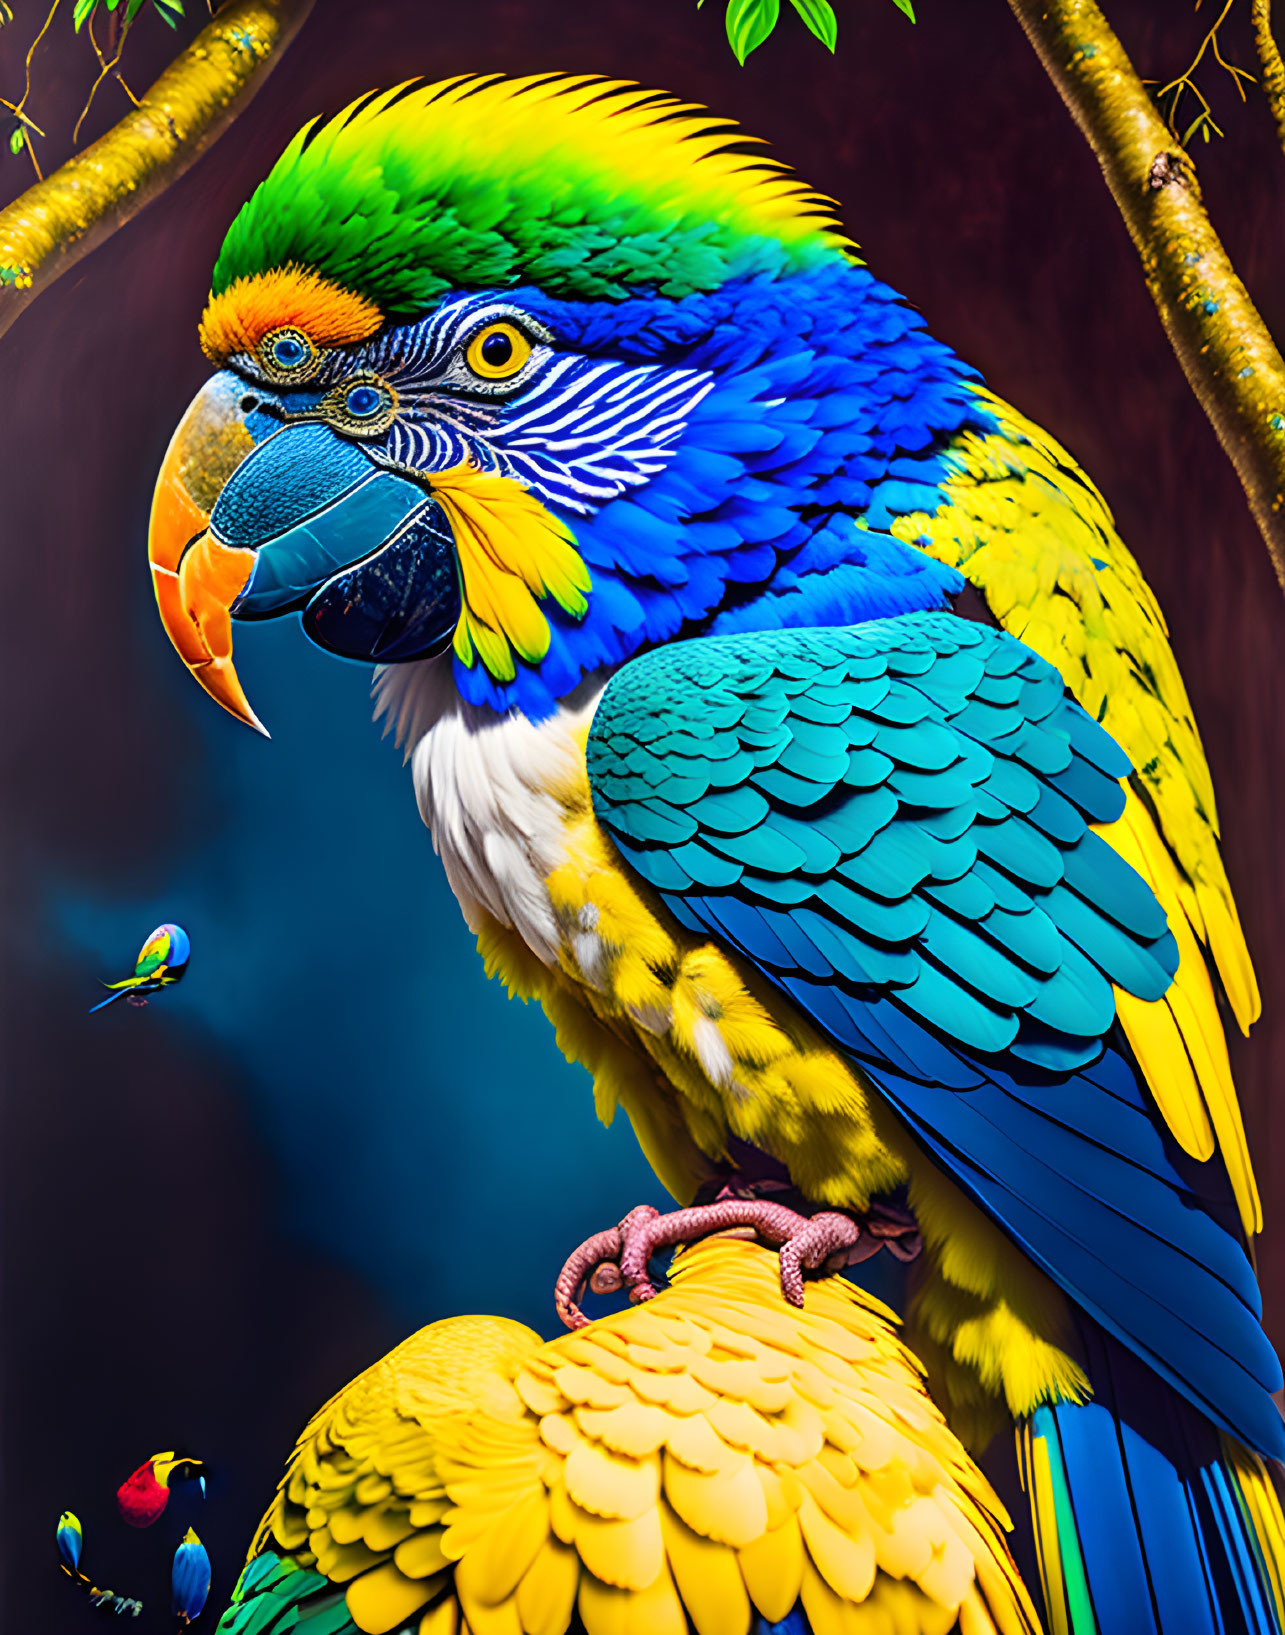 Colorful Parrot Perched on Branch with Flying Birds